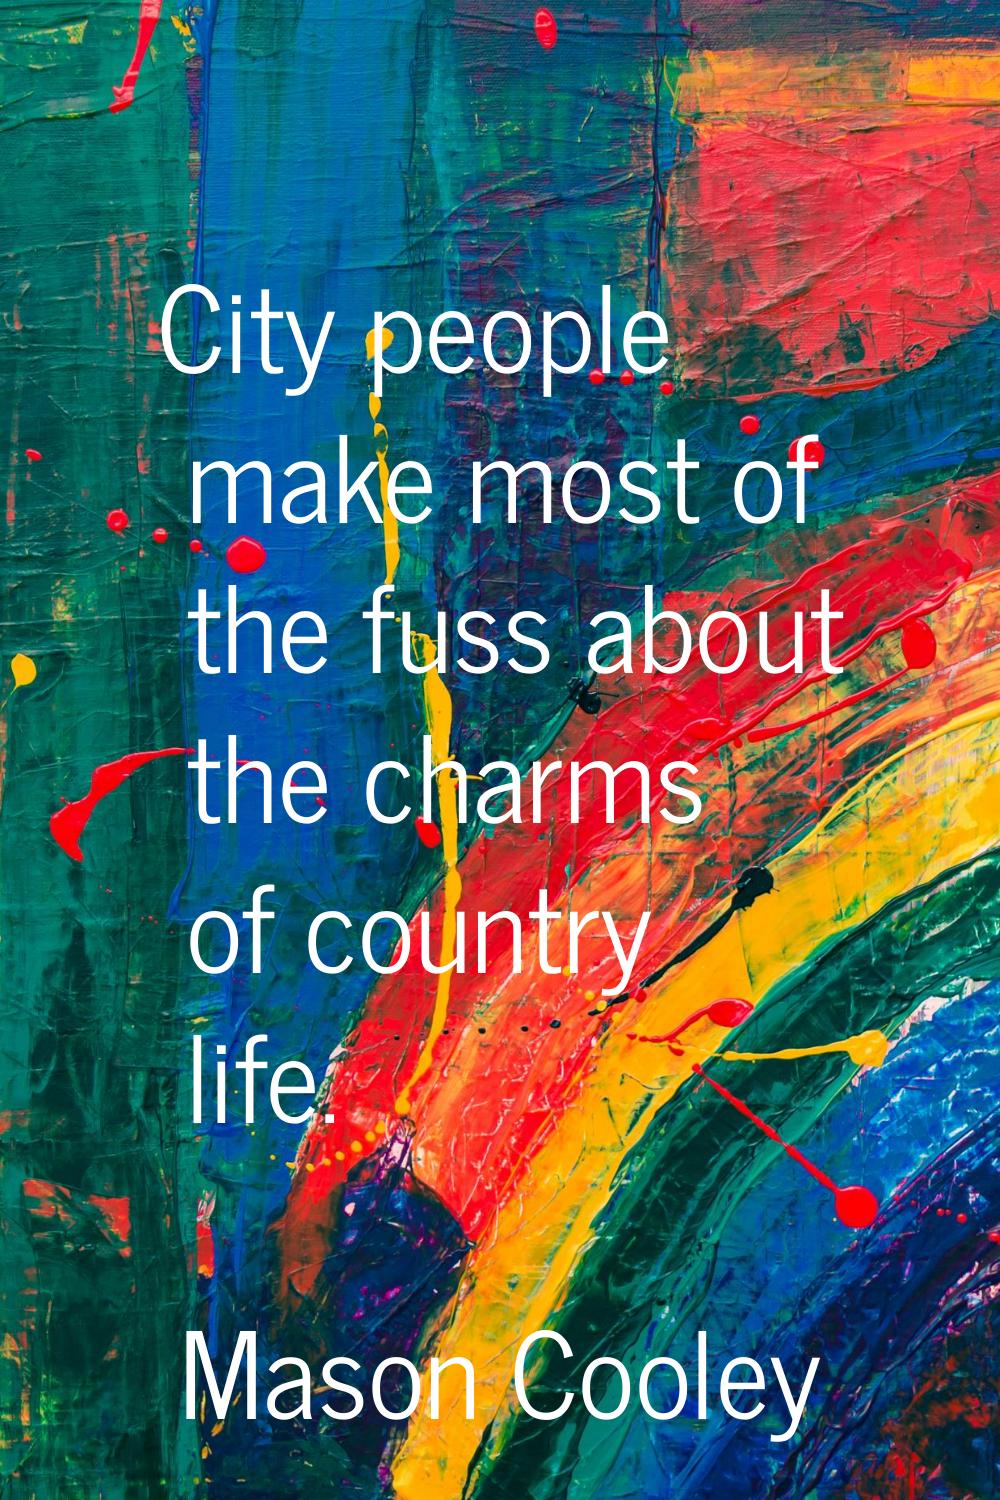 City people make most of the fuss about the charms of country life.